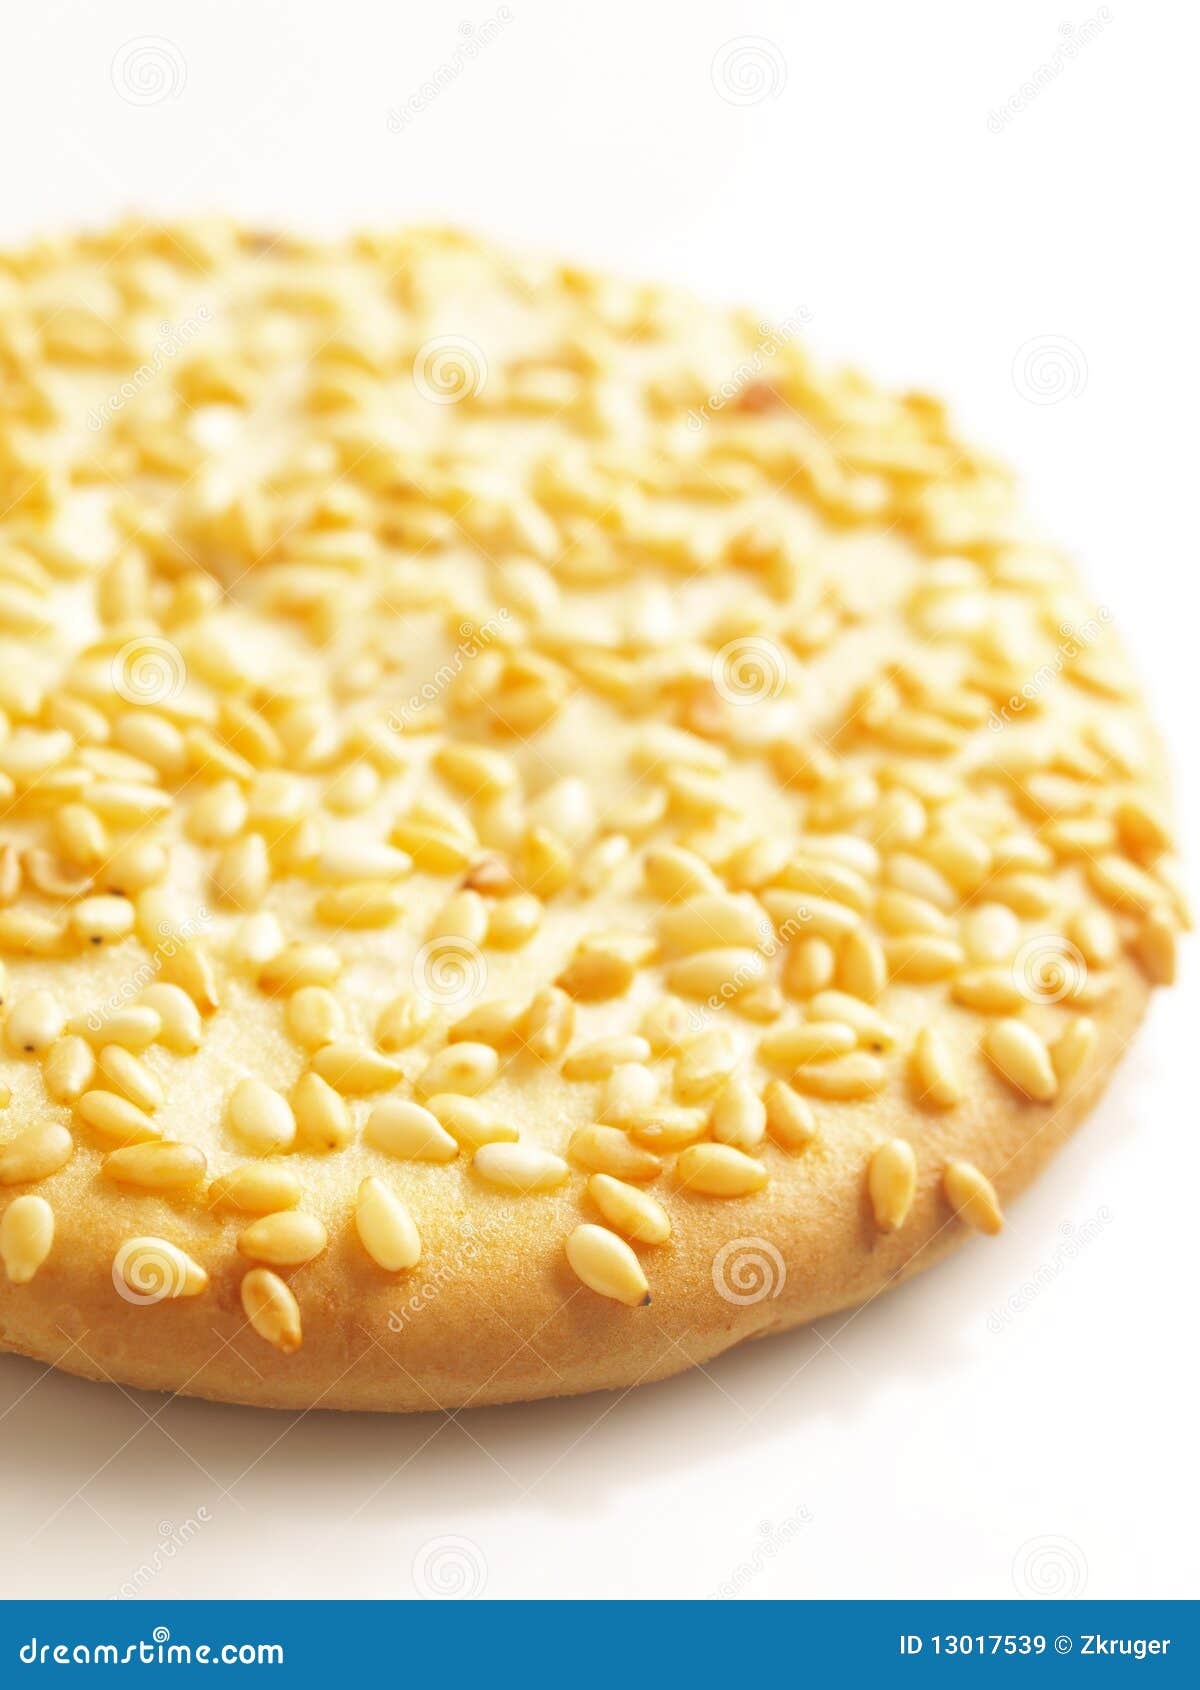 Sesame biscuit stock image. Image of cookie, color, baked - 13017539